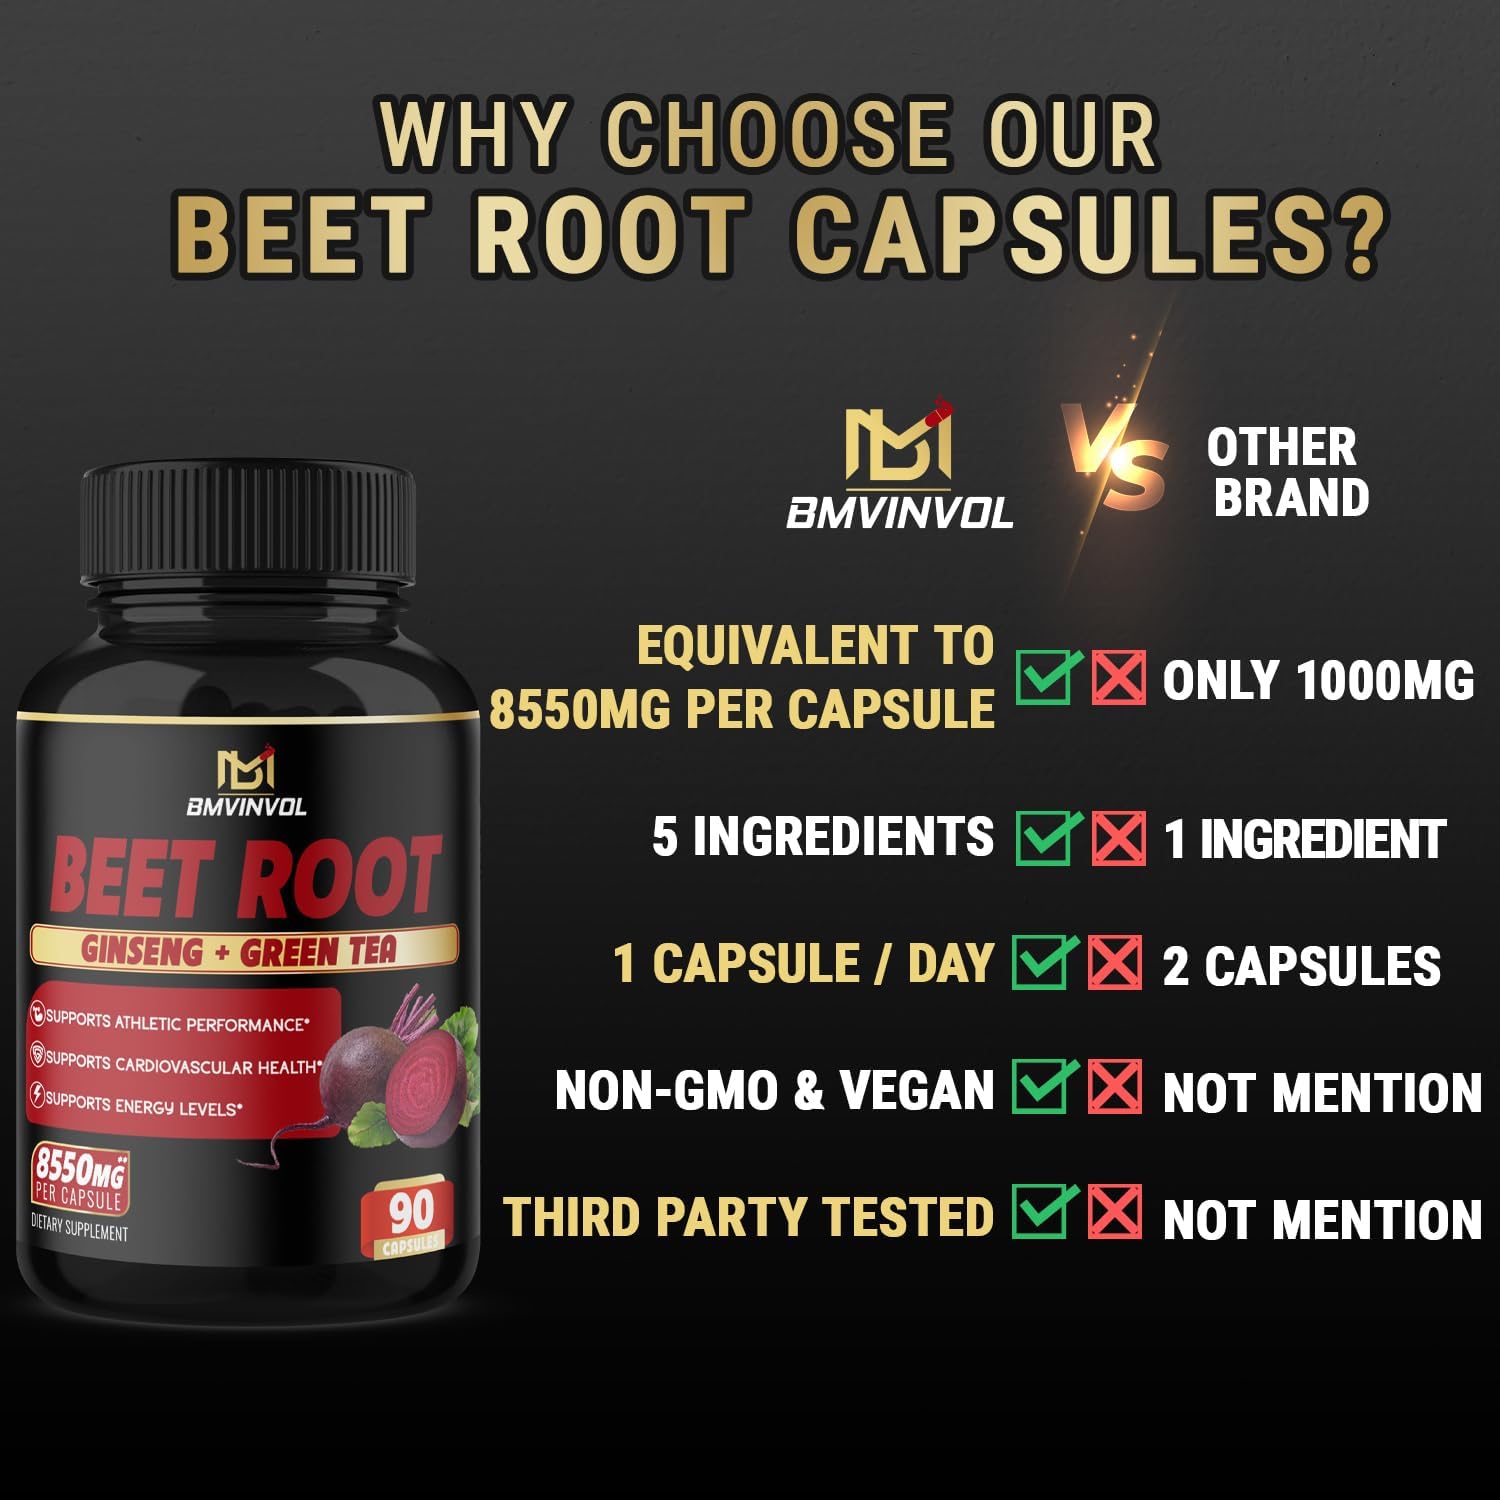 BMVINVOL Beet Root Extract Capsules 8550mg - Green Tea, Red Spinach, Ginseng - Supports Athletic Performance, Digestive, Immune System - 3 Months Supply : Health & Household